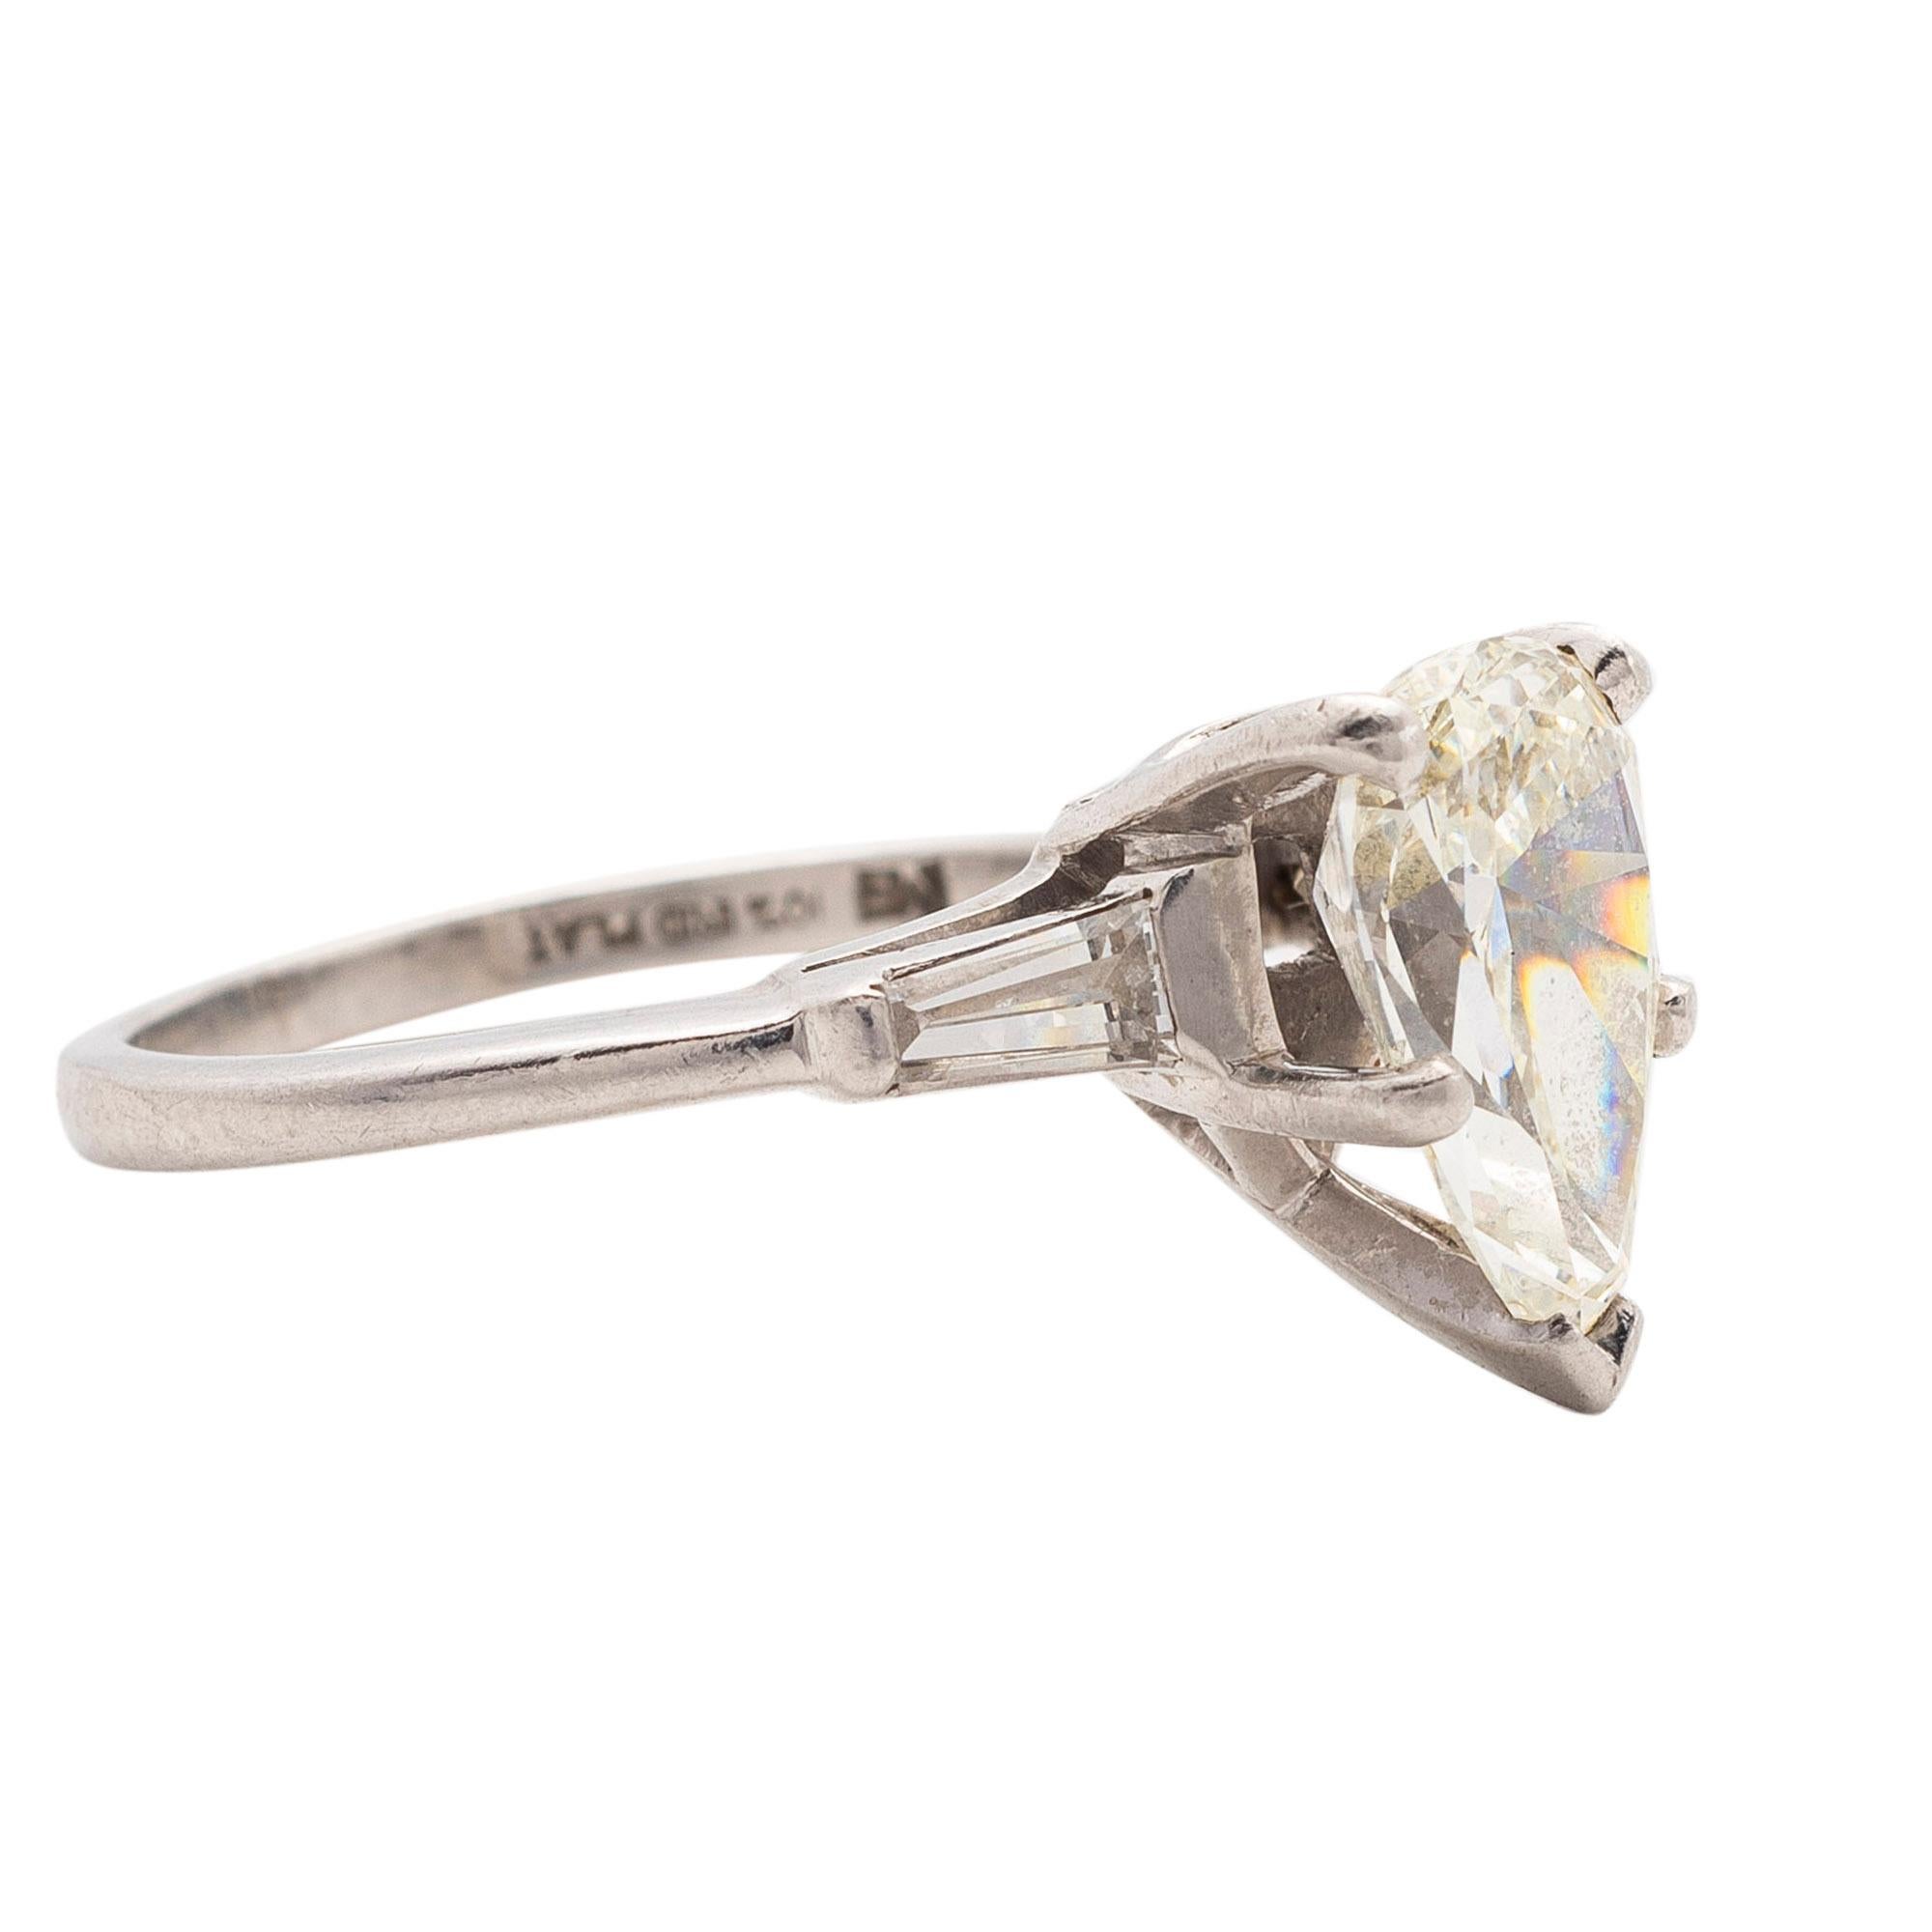 Diamond Ring
Centering a pear-shaped diamond weighing approximately 2.30 carats, on a raised mount highlighted with fluted shoulders flanked by tapered baguette diamonds, mounted in Platinum, size 5.